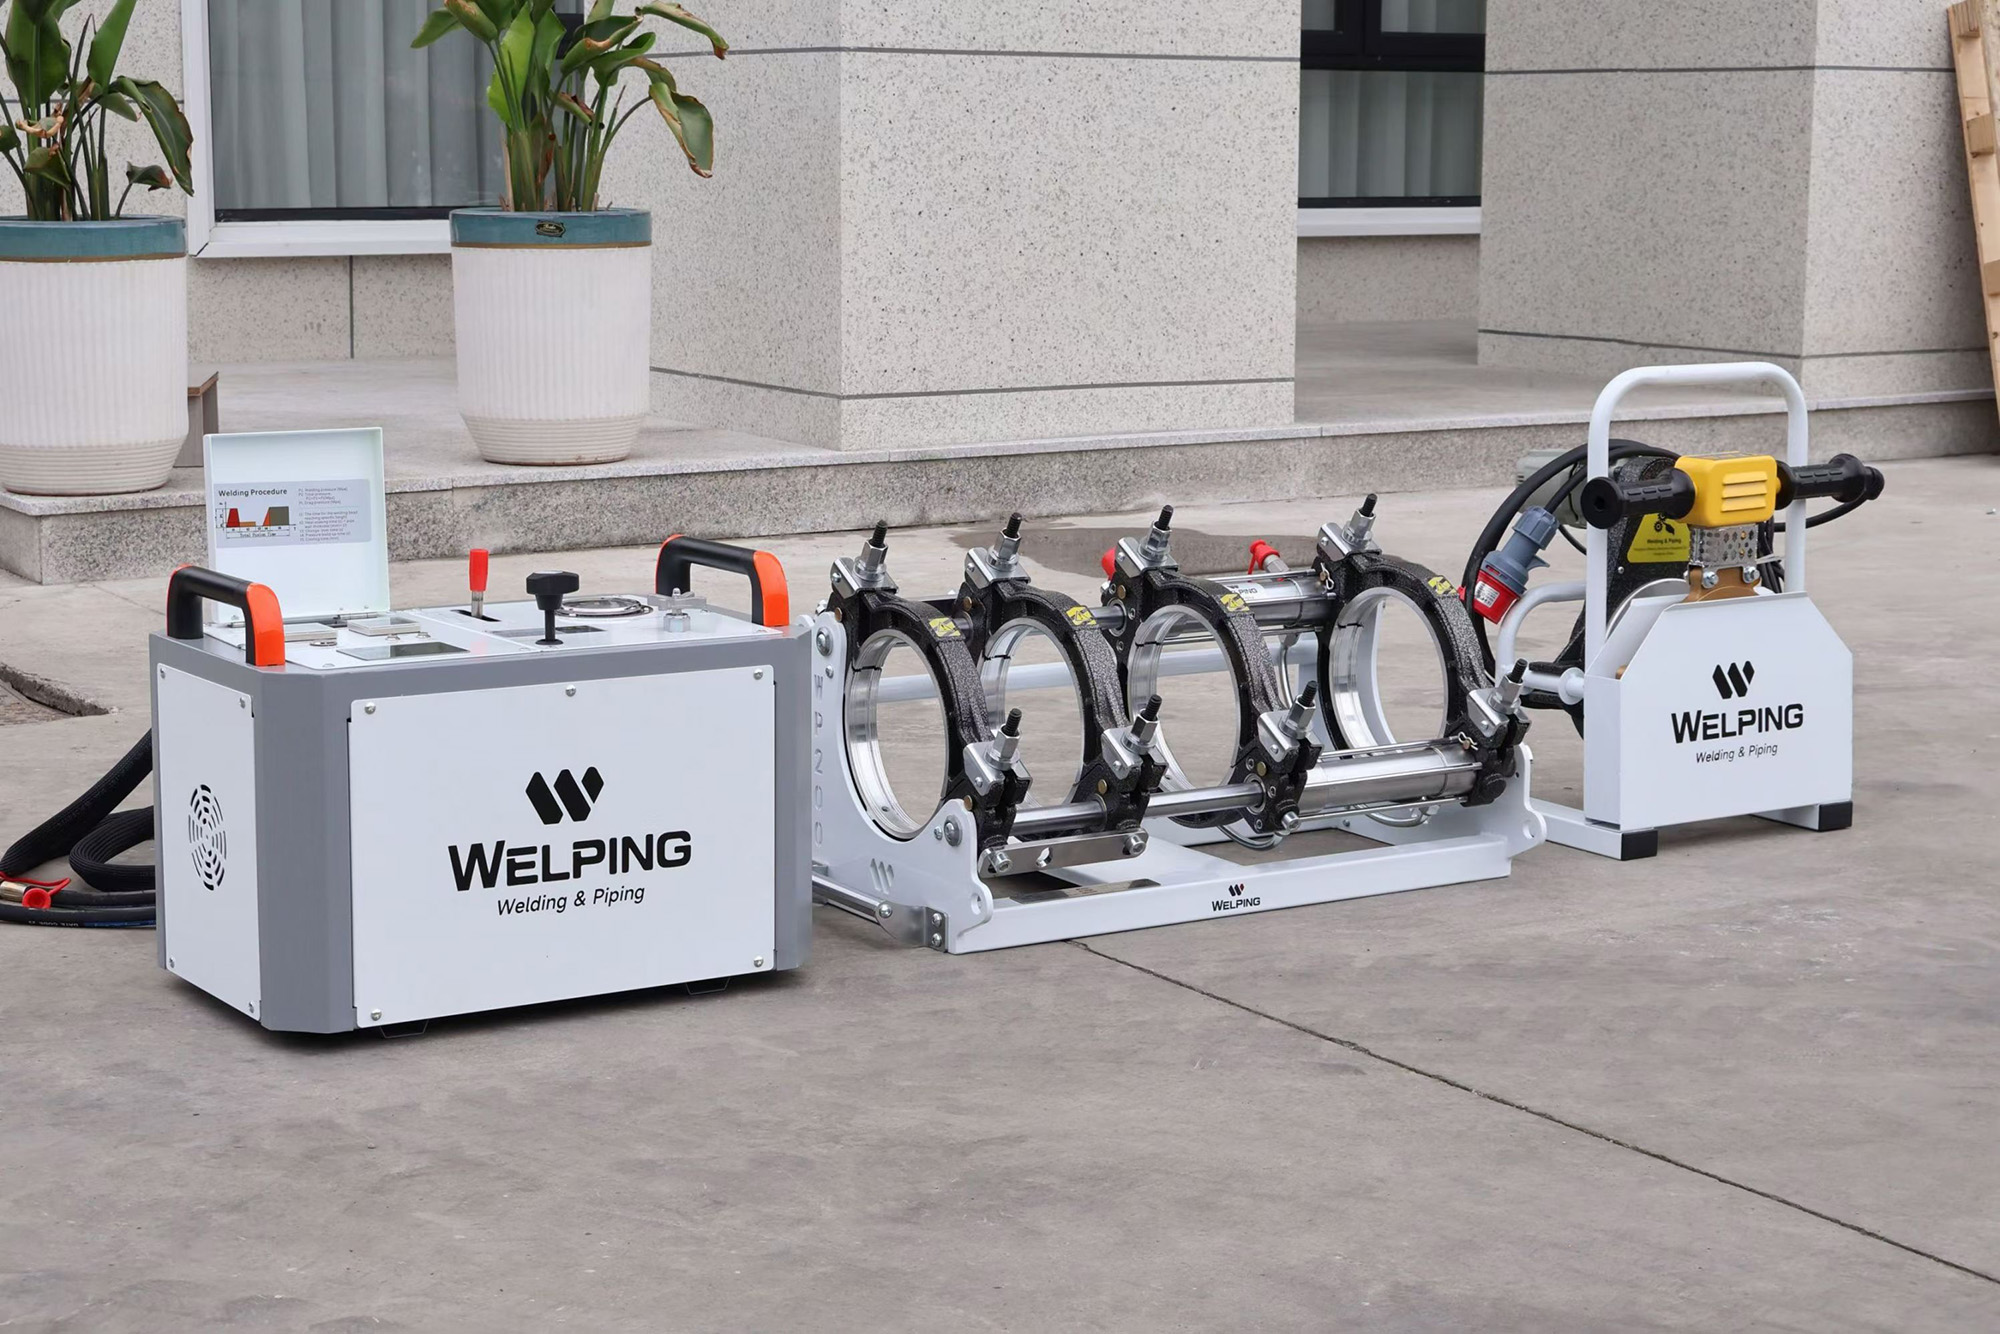 This butt welding machine can improve construction efficiency